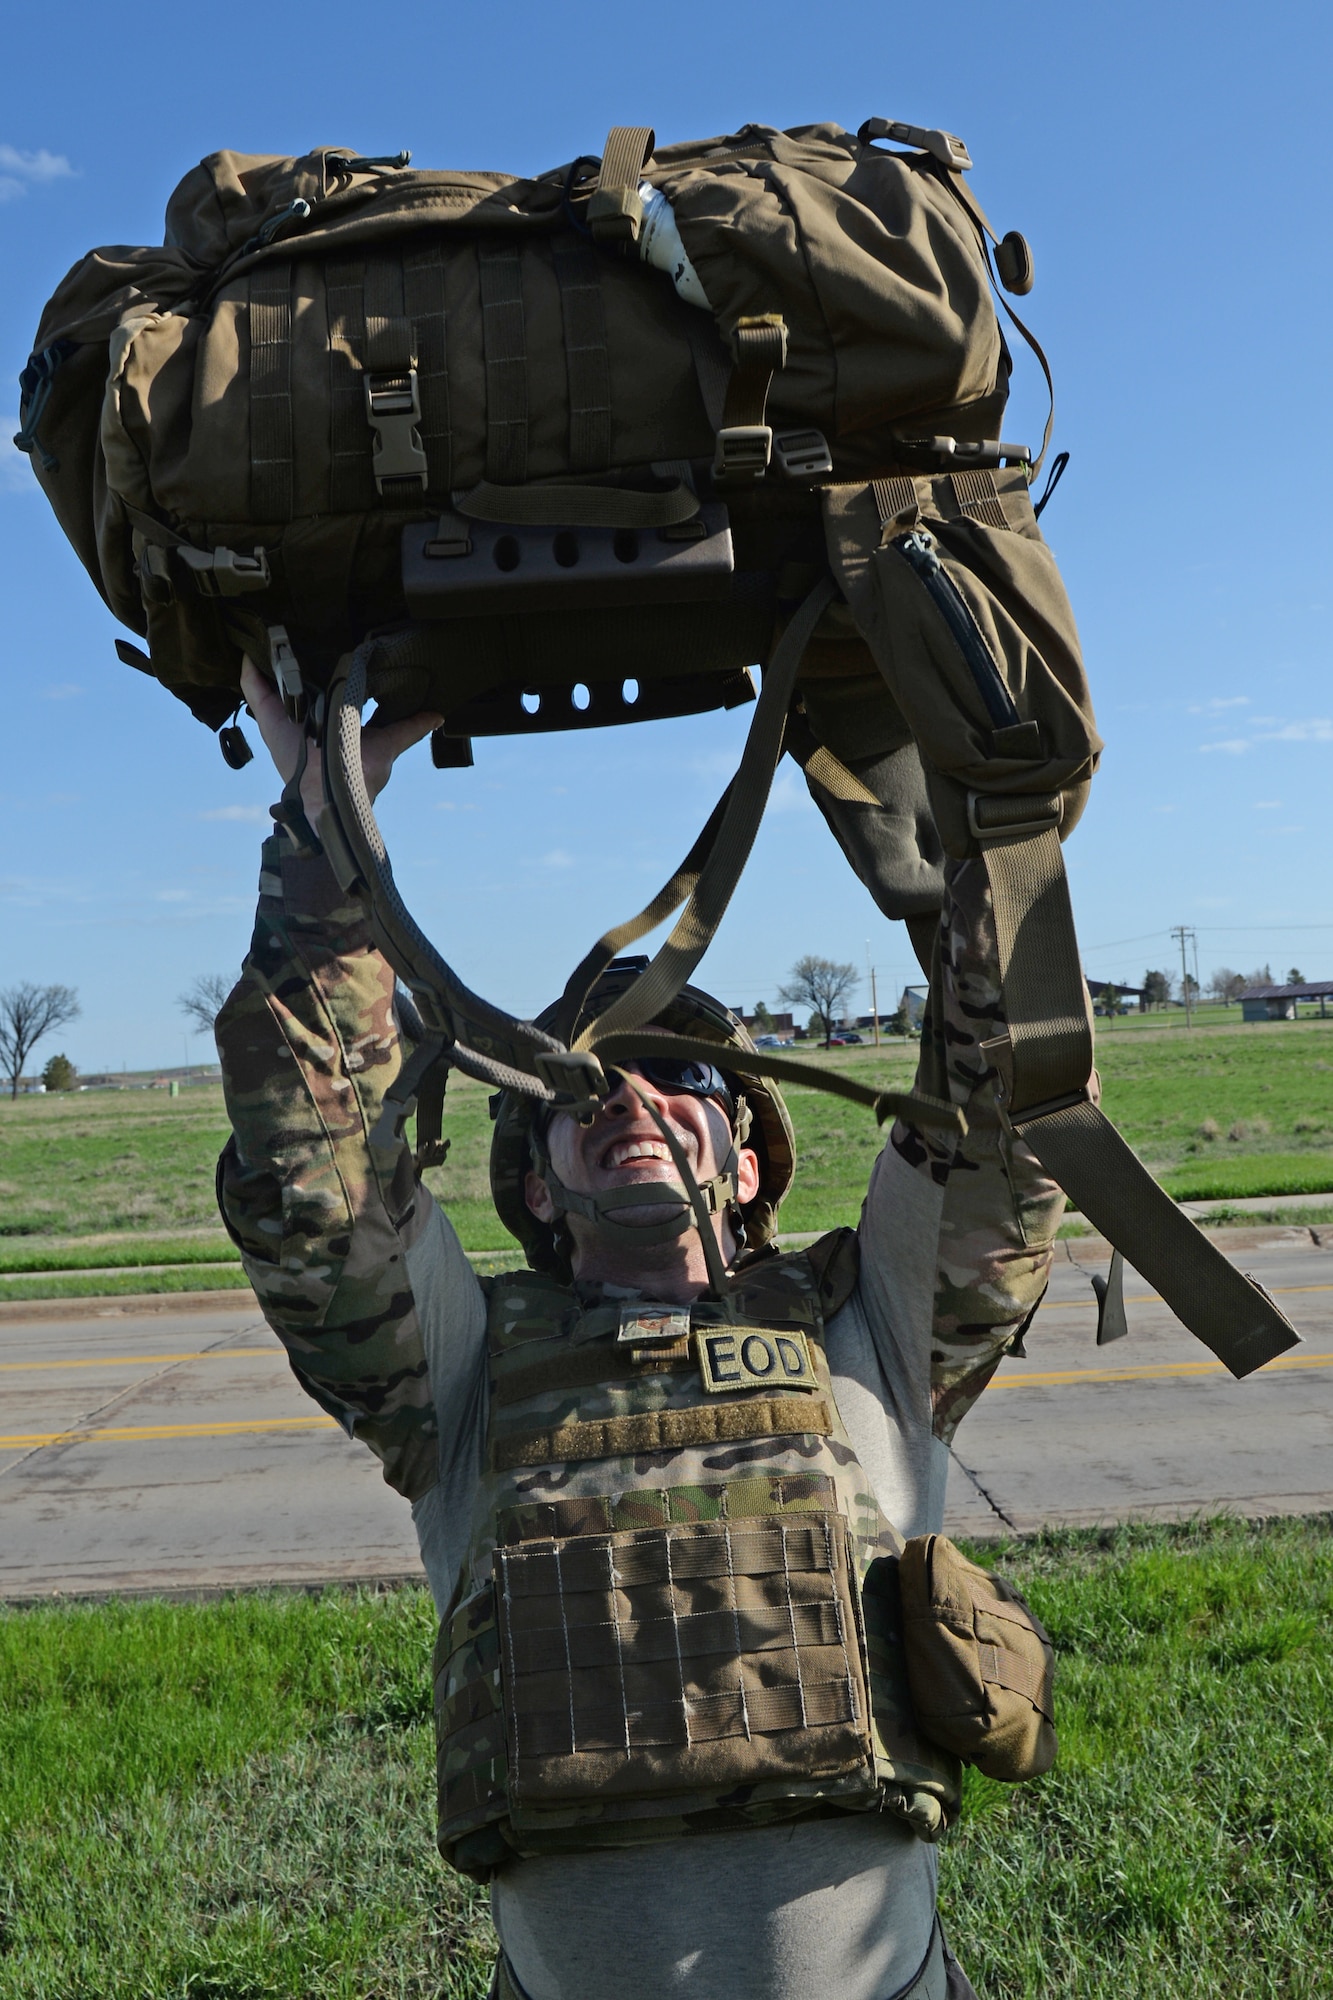 Master Sgt. Carlos Sanchez, 28th Civil Engineer Explosive Ordnance Disposal flight lead, performs 32 ruck presses during the 50th Anniversary EOD Memorial Day ruck march at Ellsworth Air Force Base, S.D., May 4, 2018. The 32 repetitions of the exercises represent the 32 fallen EOD Airmen who have been killed in the line of duty since 9/11.  (U.S. Air Force photo by Airman 1st Class Nicolas Z. Erwin)